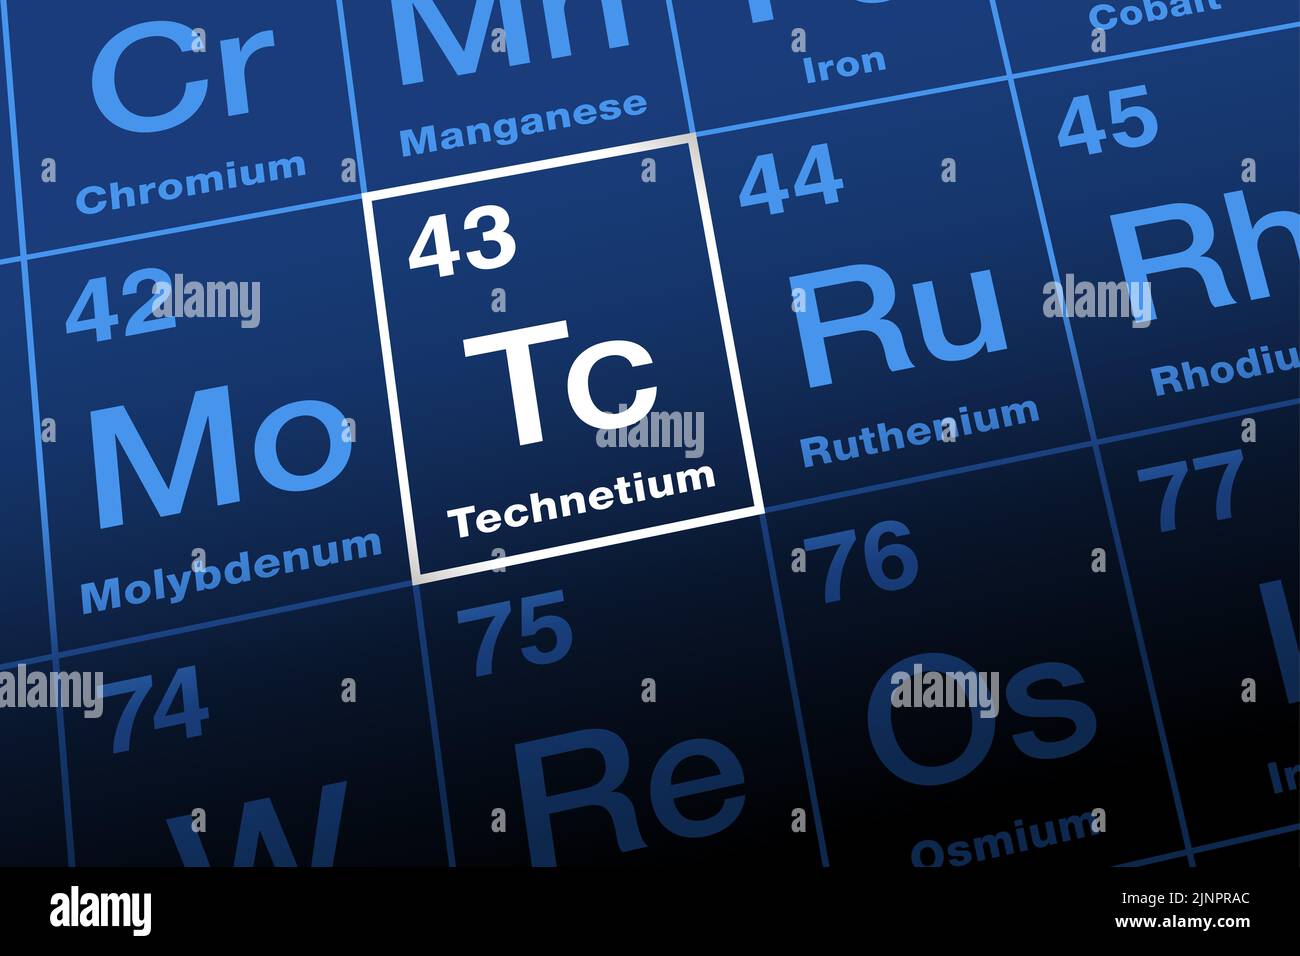 Technetium on periodic table. Transition metal with atomic number 43, named after Greek technetos, meaning artificial. Stock Photo